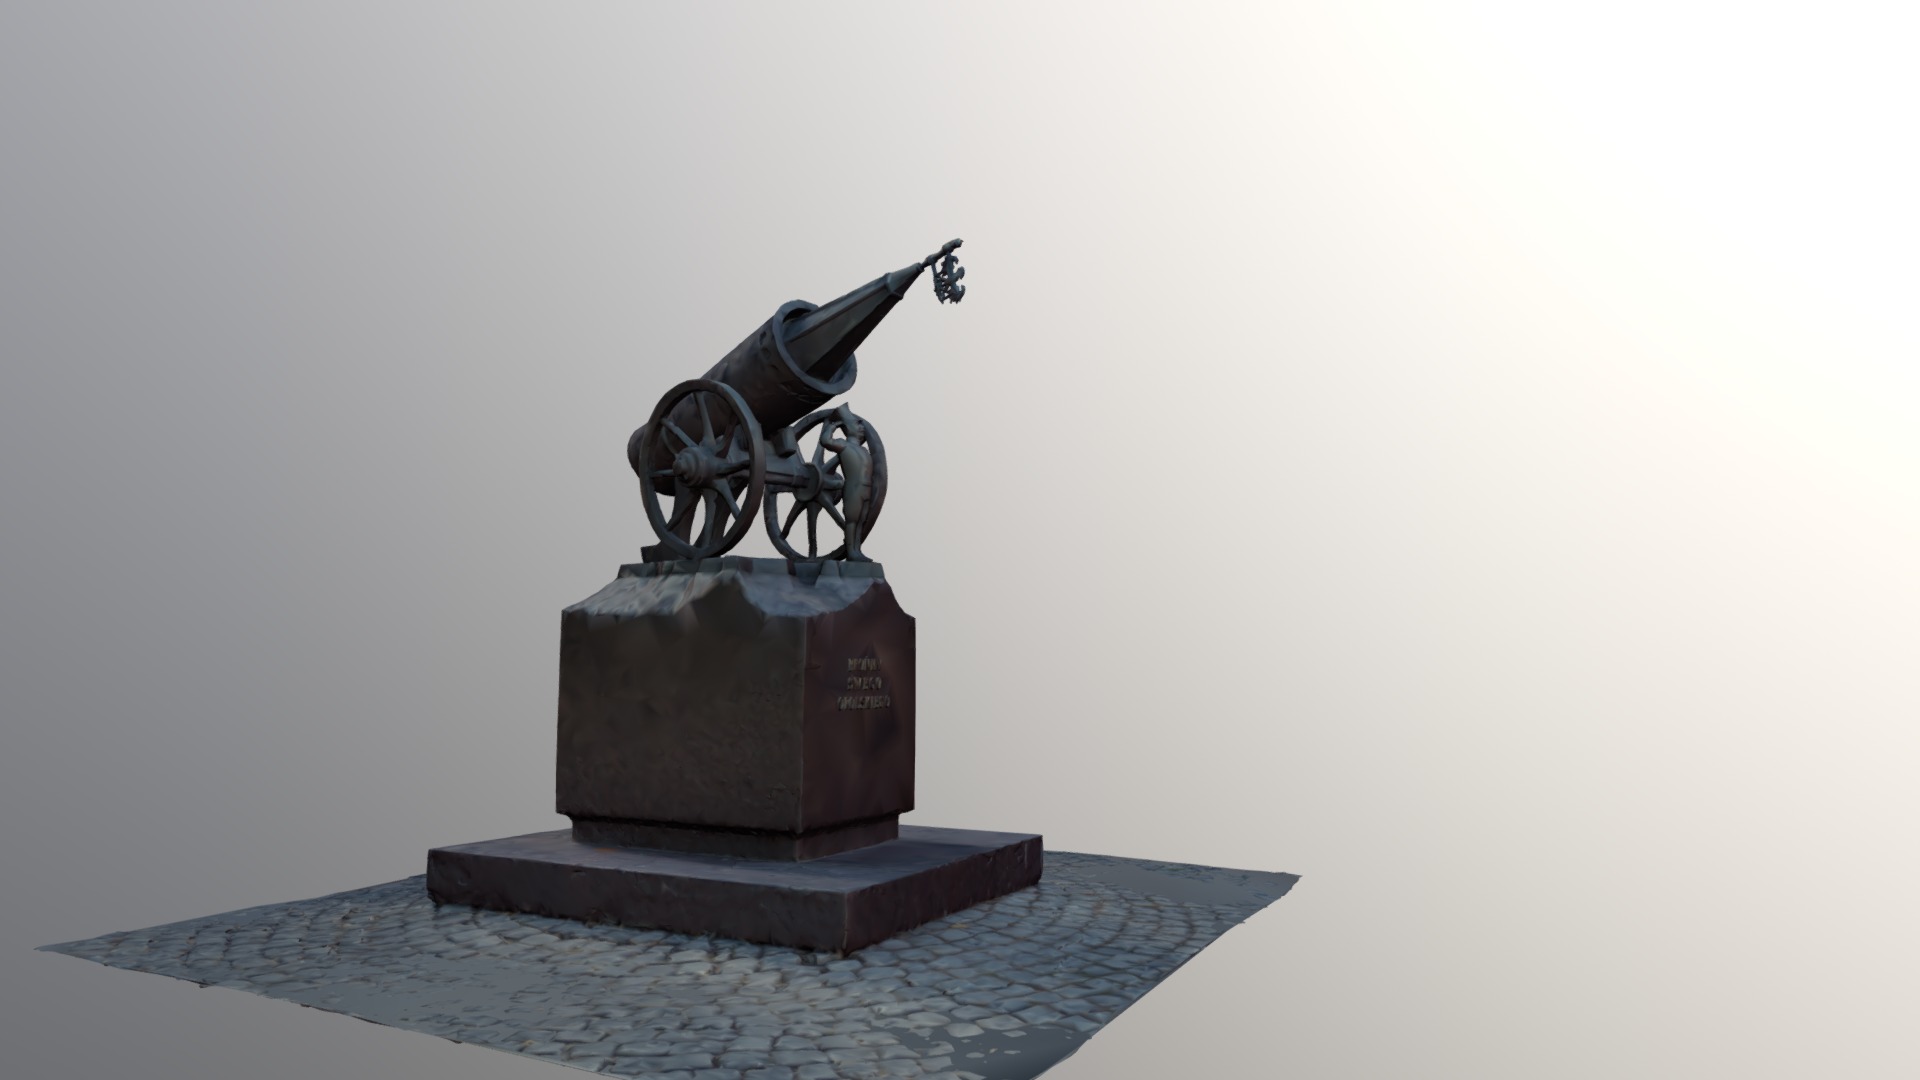 3D model Monument Opole Poland 3d scan by Andrii Shramko - This is a 3D model of the Monument Opole Poland 3d scan by Andrii Shramko. The 3D model is about a statue of a gun.